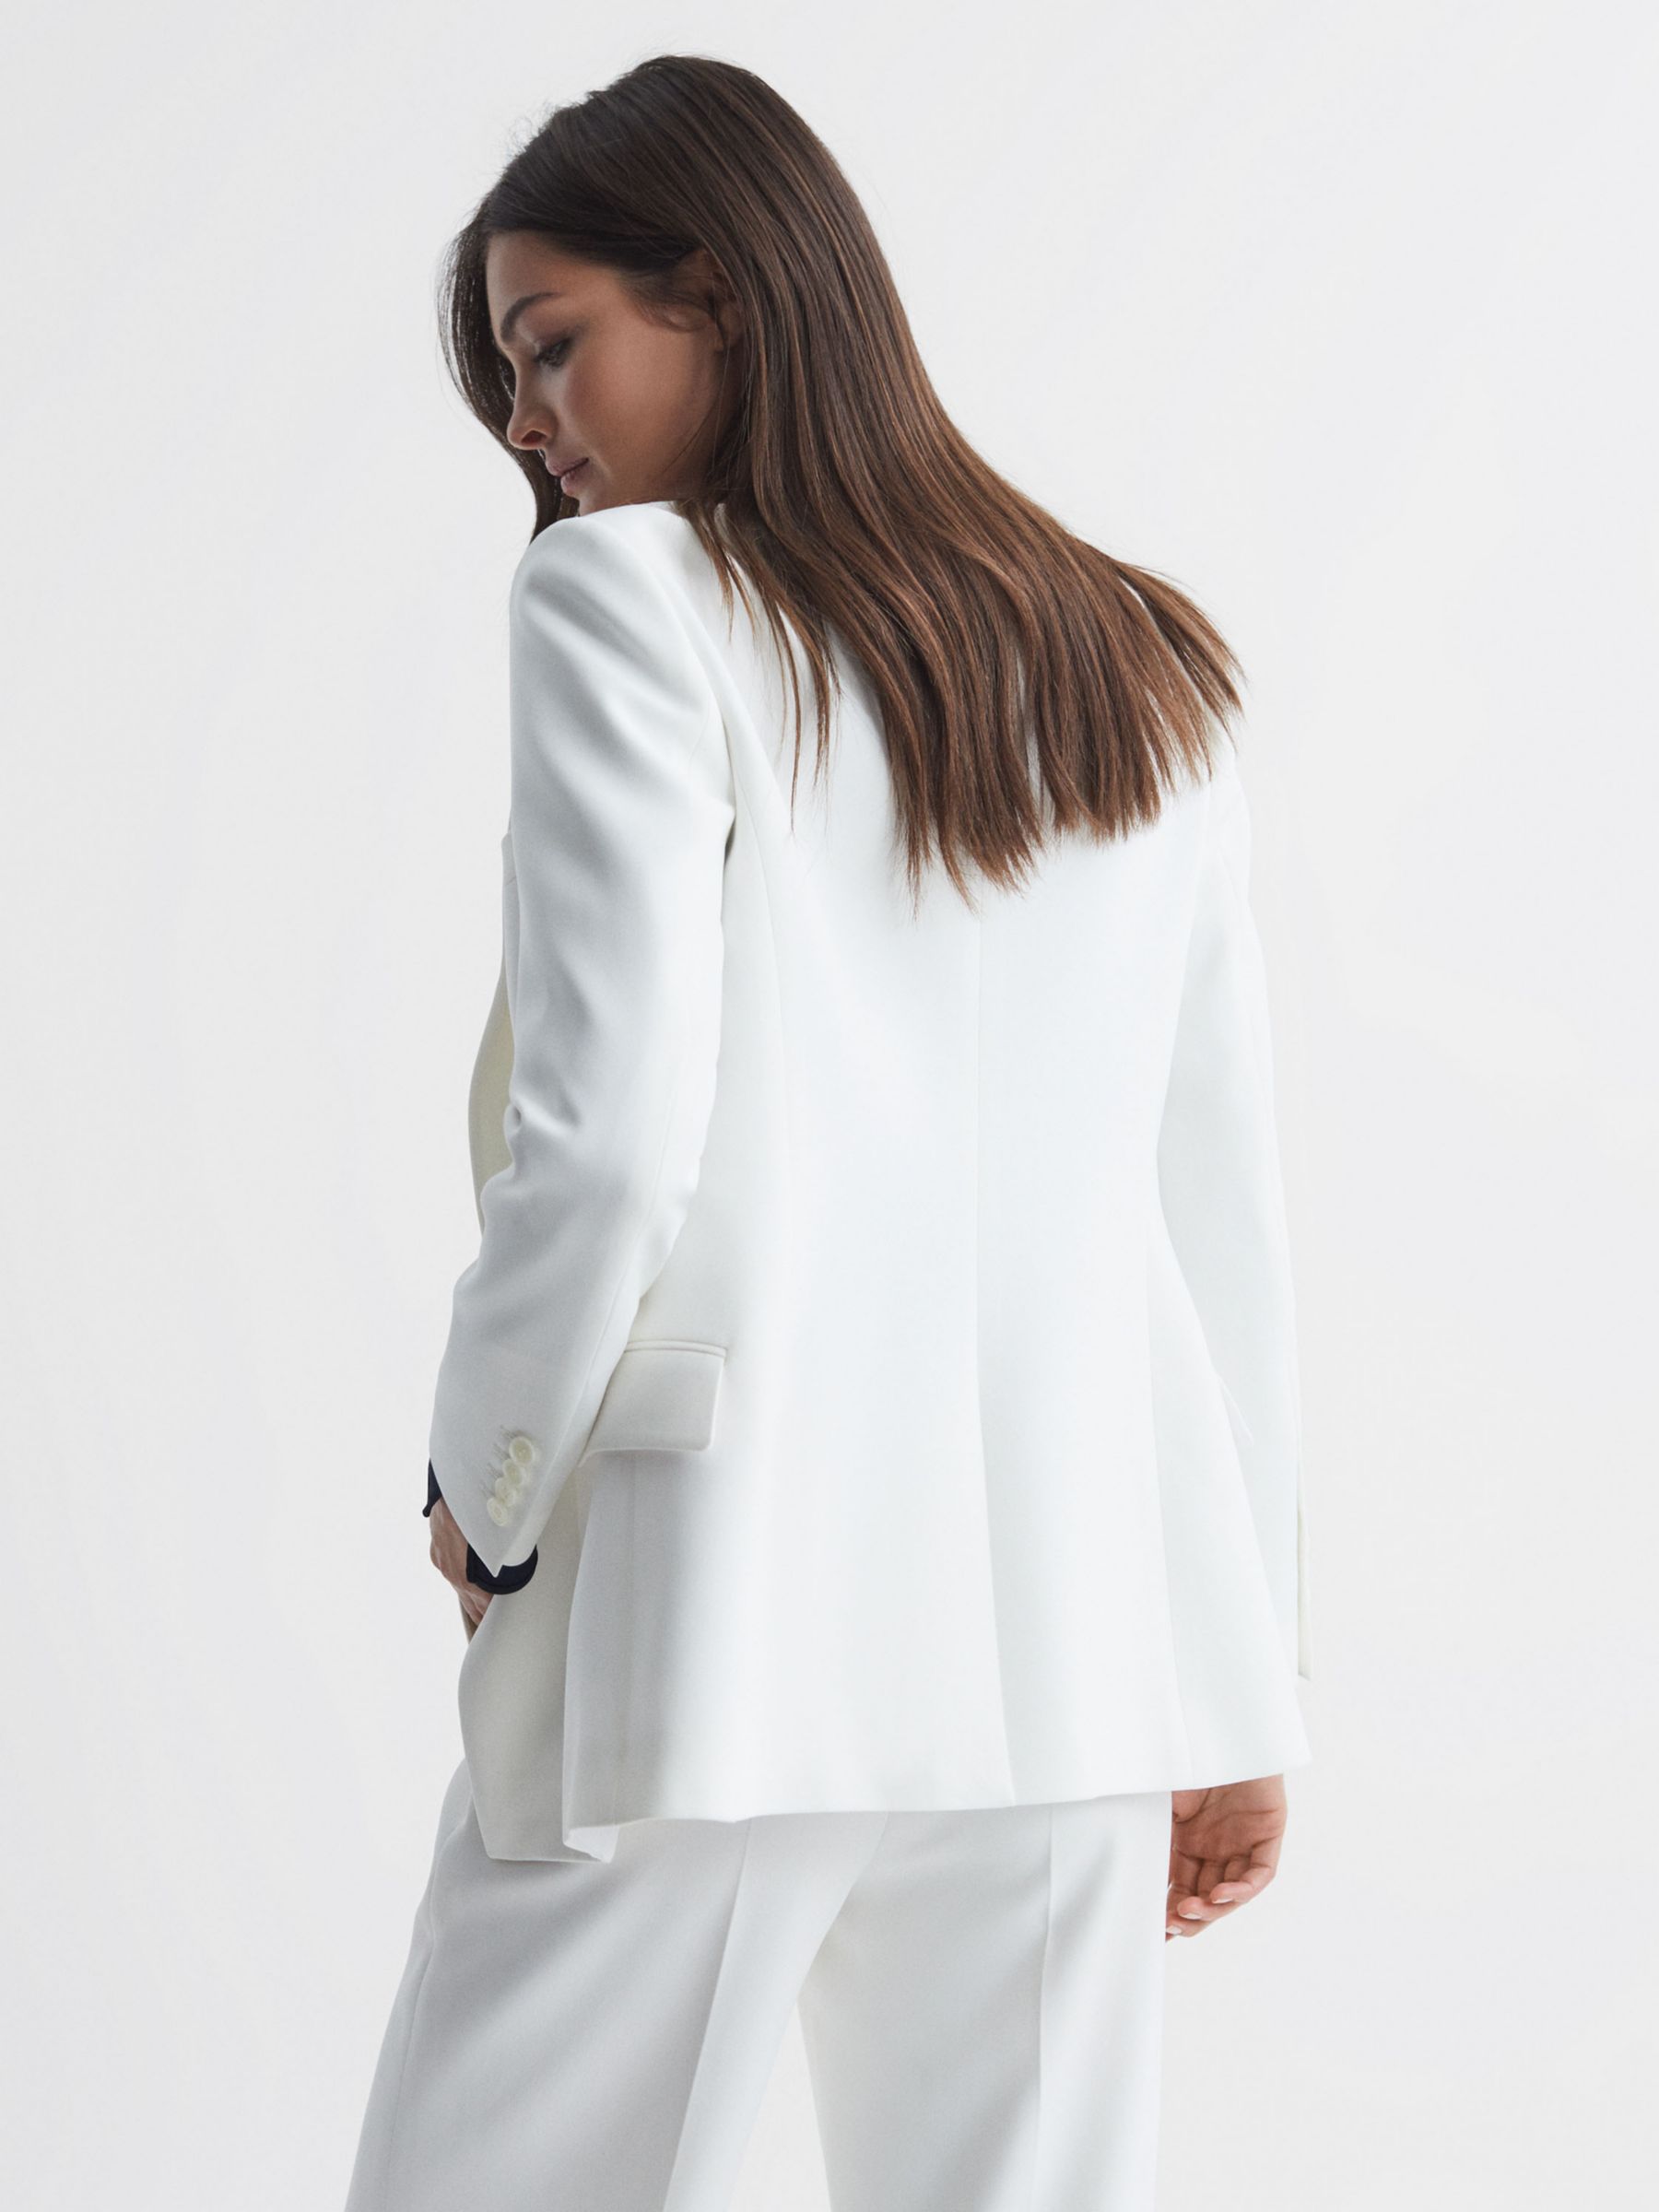 Buy Reiss Petite Sienna Double Breasted Crepe Blazer, White Online at johnlewis.com